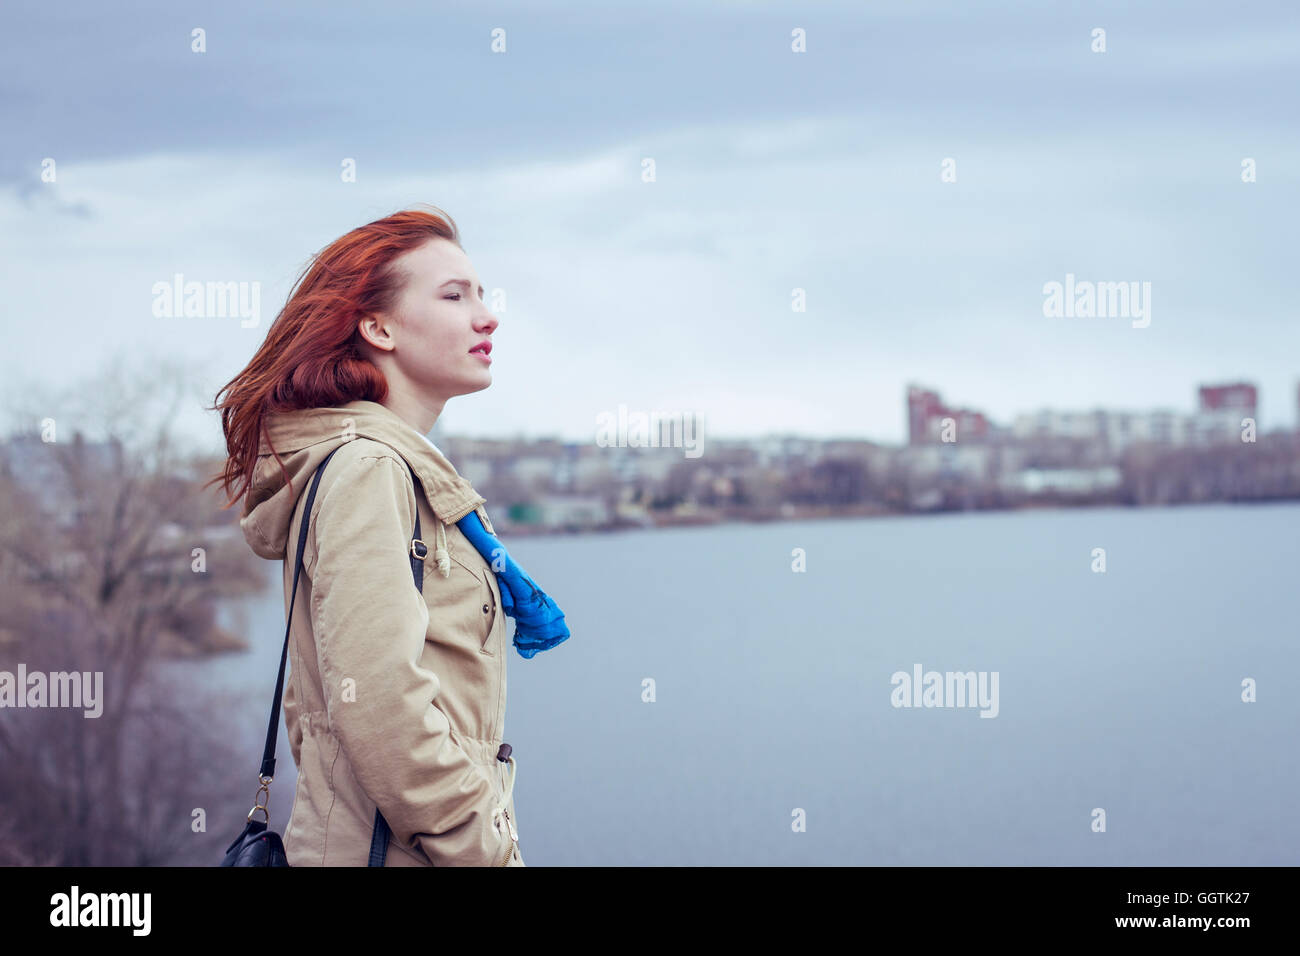 Woman with red hair standing at waterfront Stock Photo